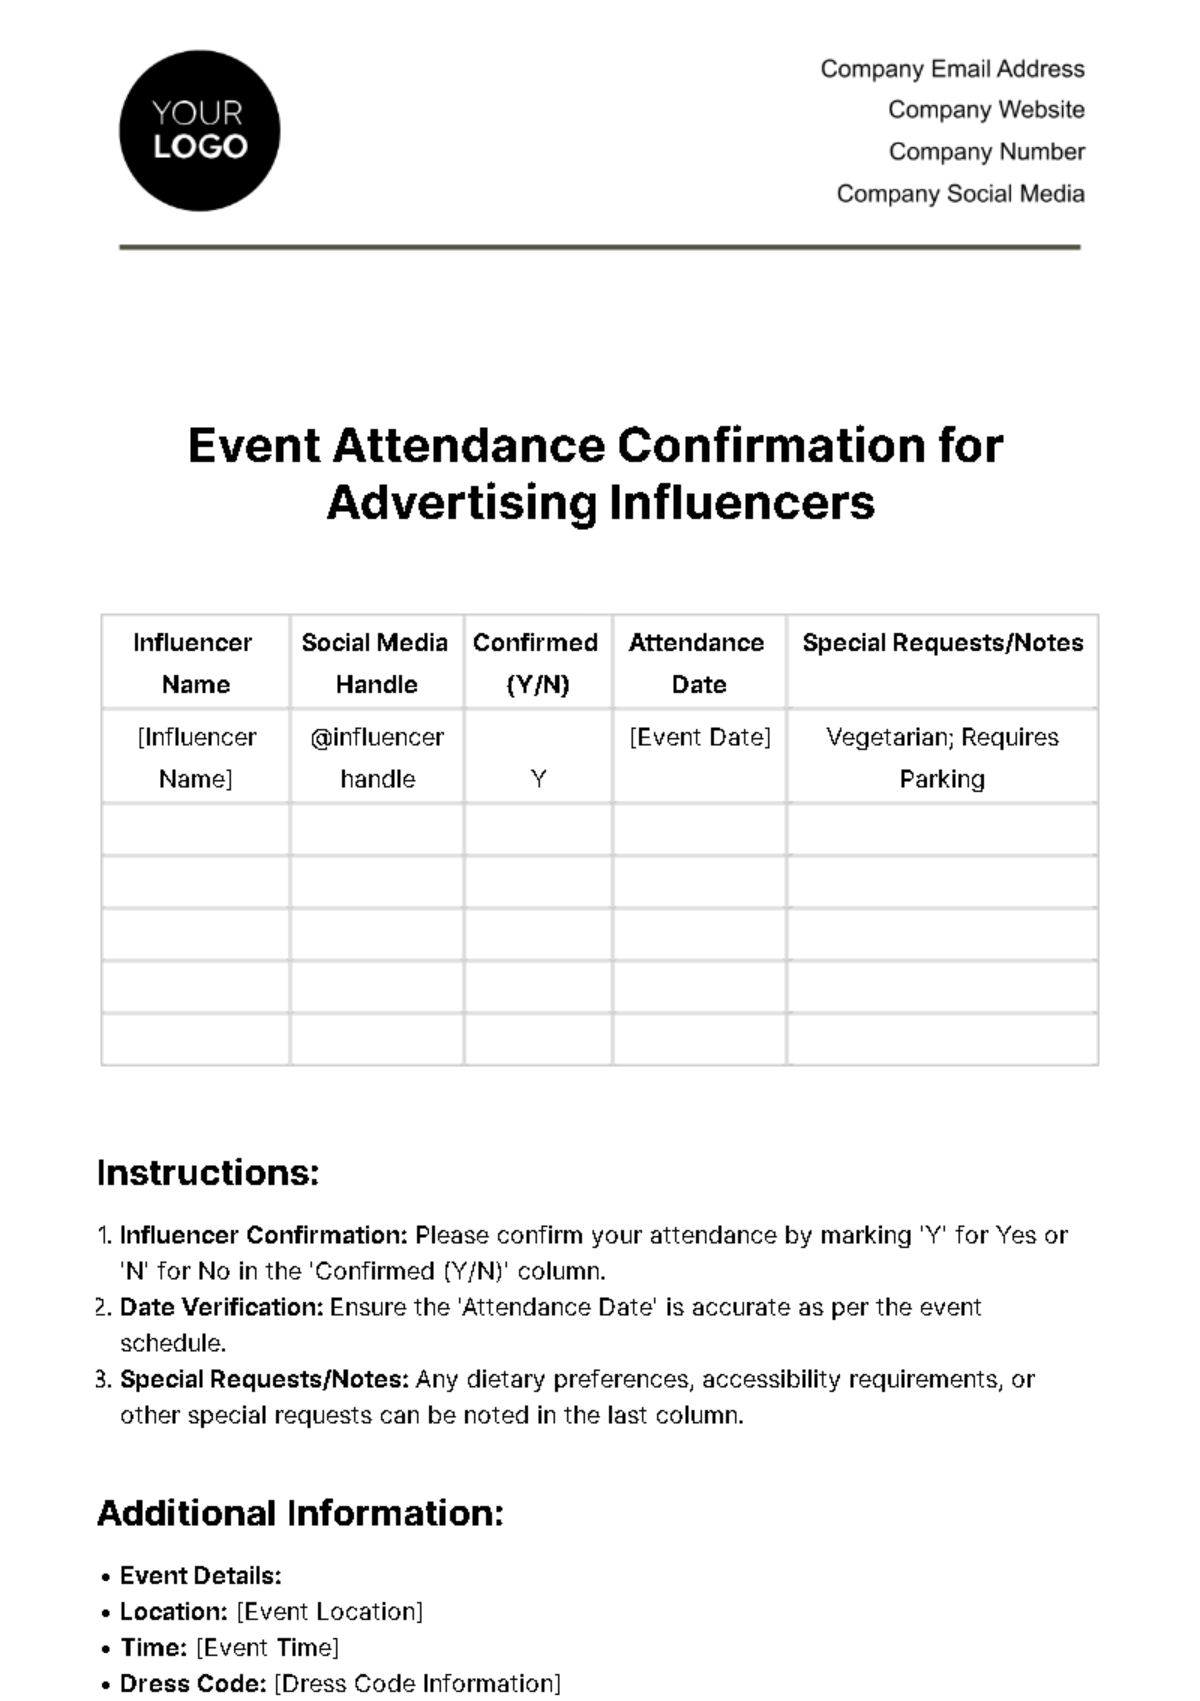 Free Event Attendance Confirmation for Advertising Influencers Template